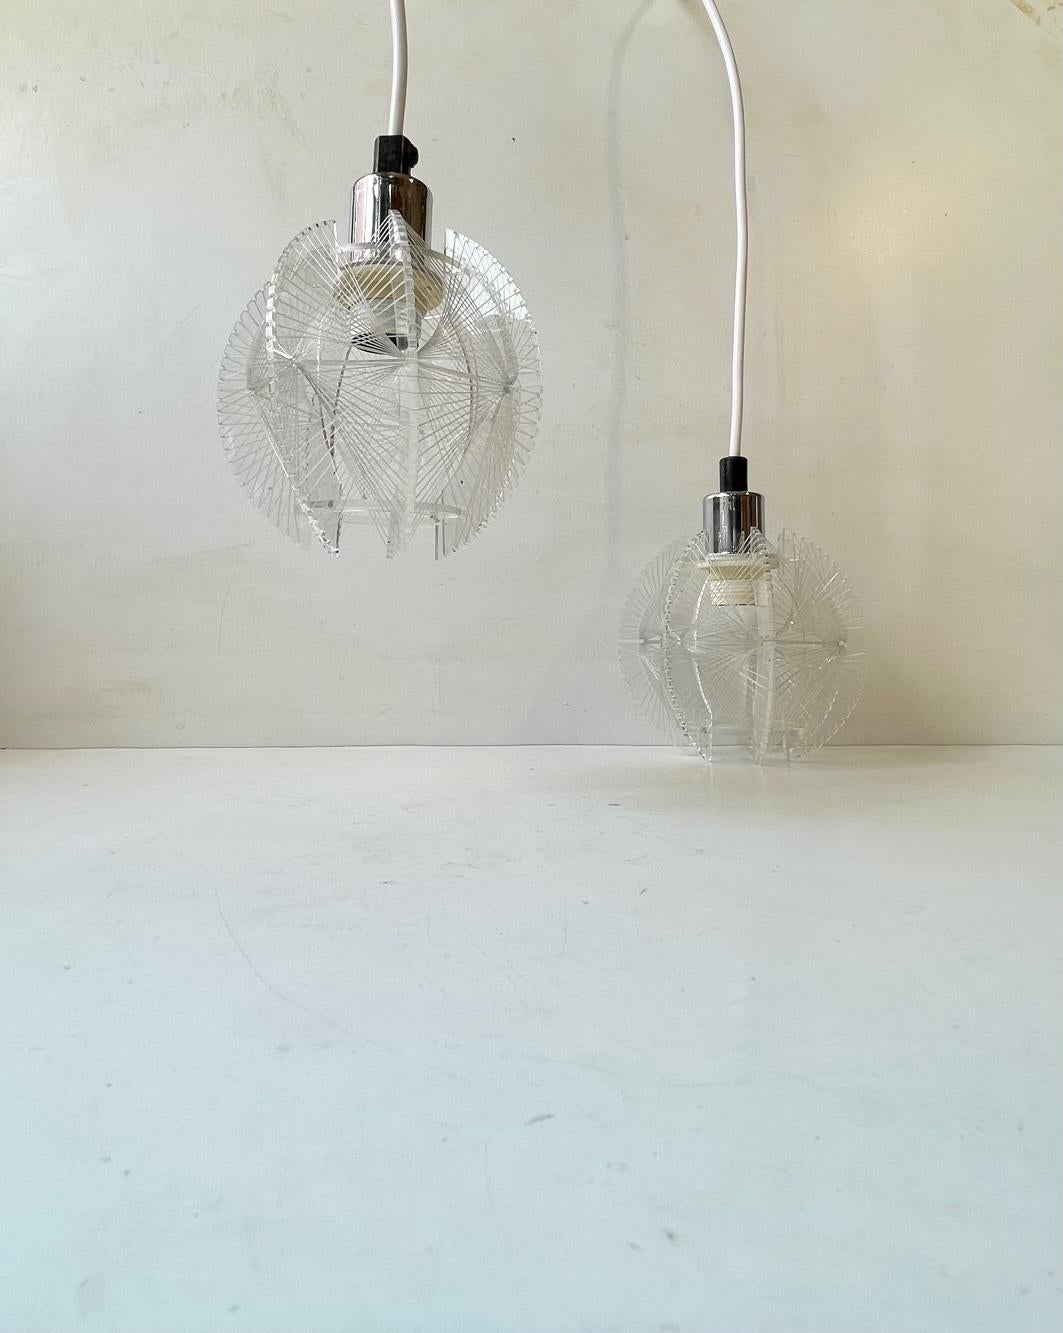 A pair of midcentury ceiling lights designed by Paul Secon and manufactured by Sompex in Germany during the 1960s or 70s. They feature Lucite frames and has Nylon wires woven all around for a dramatic, graphic lighting effect. The price is for the